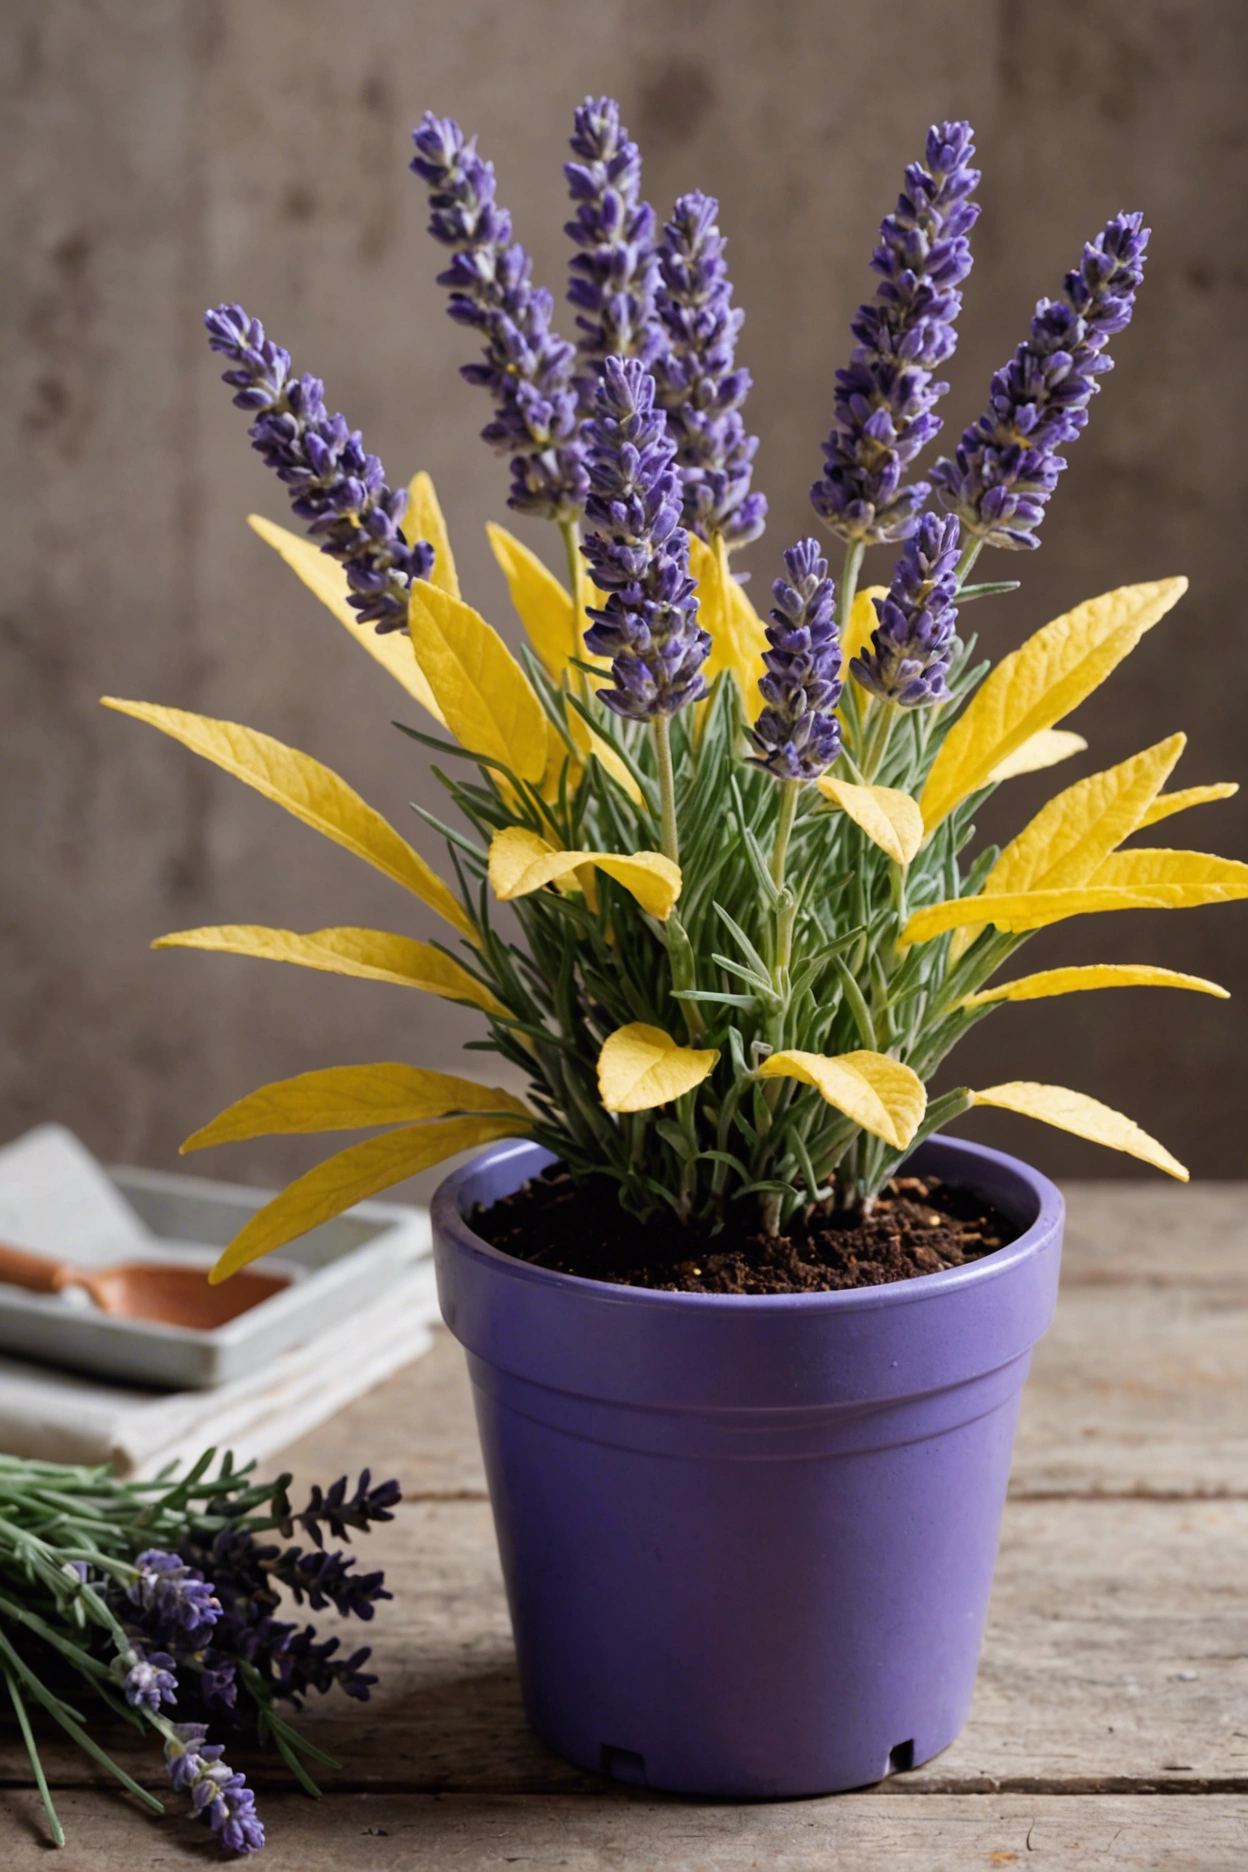 "Potted lavender plant with yellow leaves on a rustic table, surrounded by soil pH tester, moisture meter, and nutrient supplements."